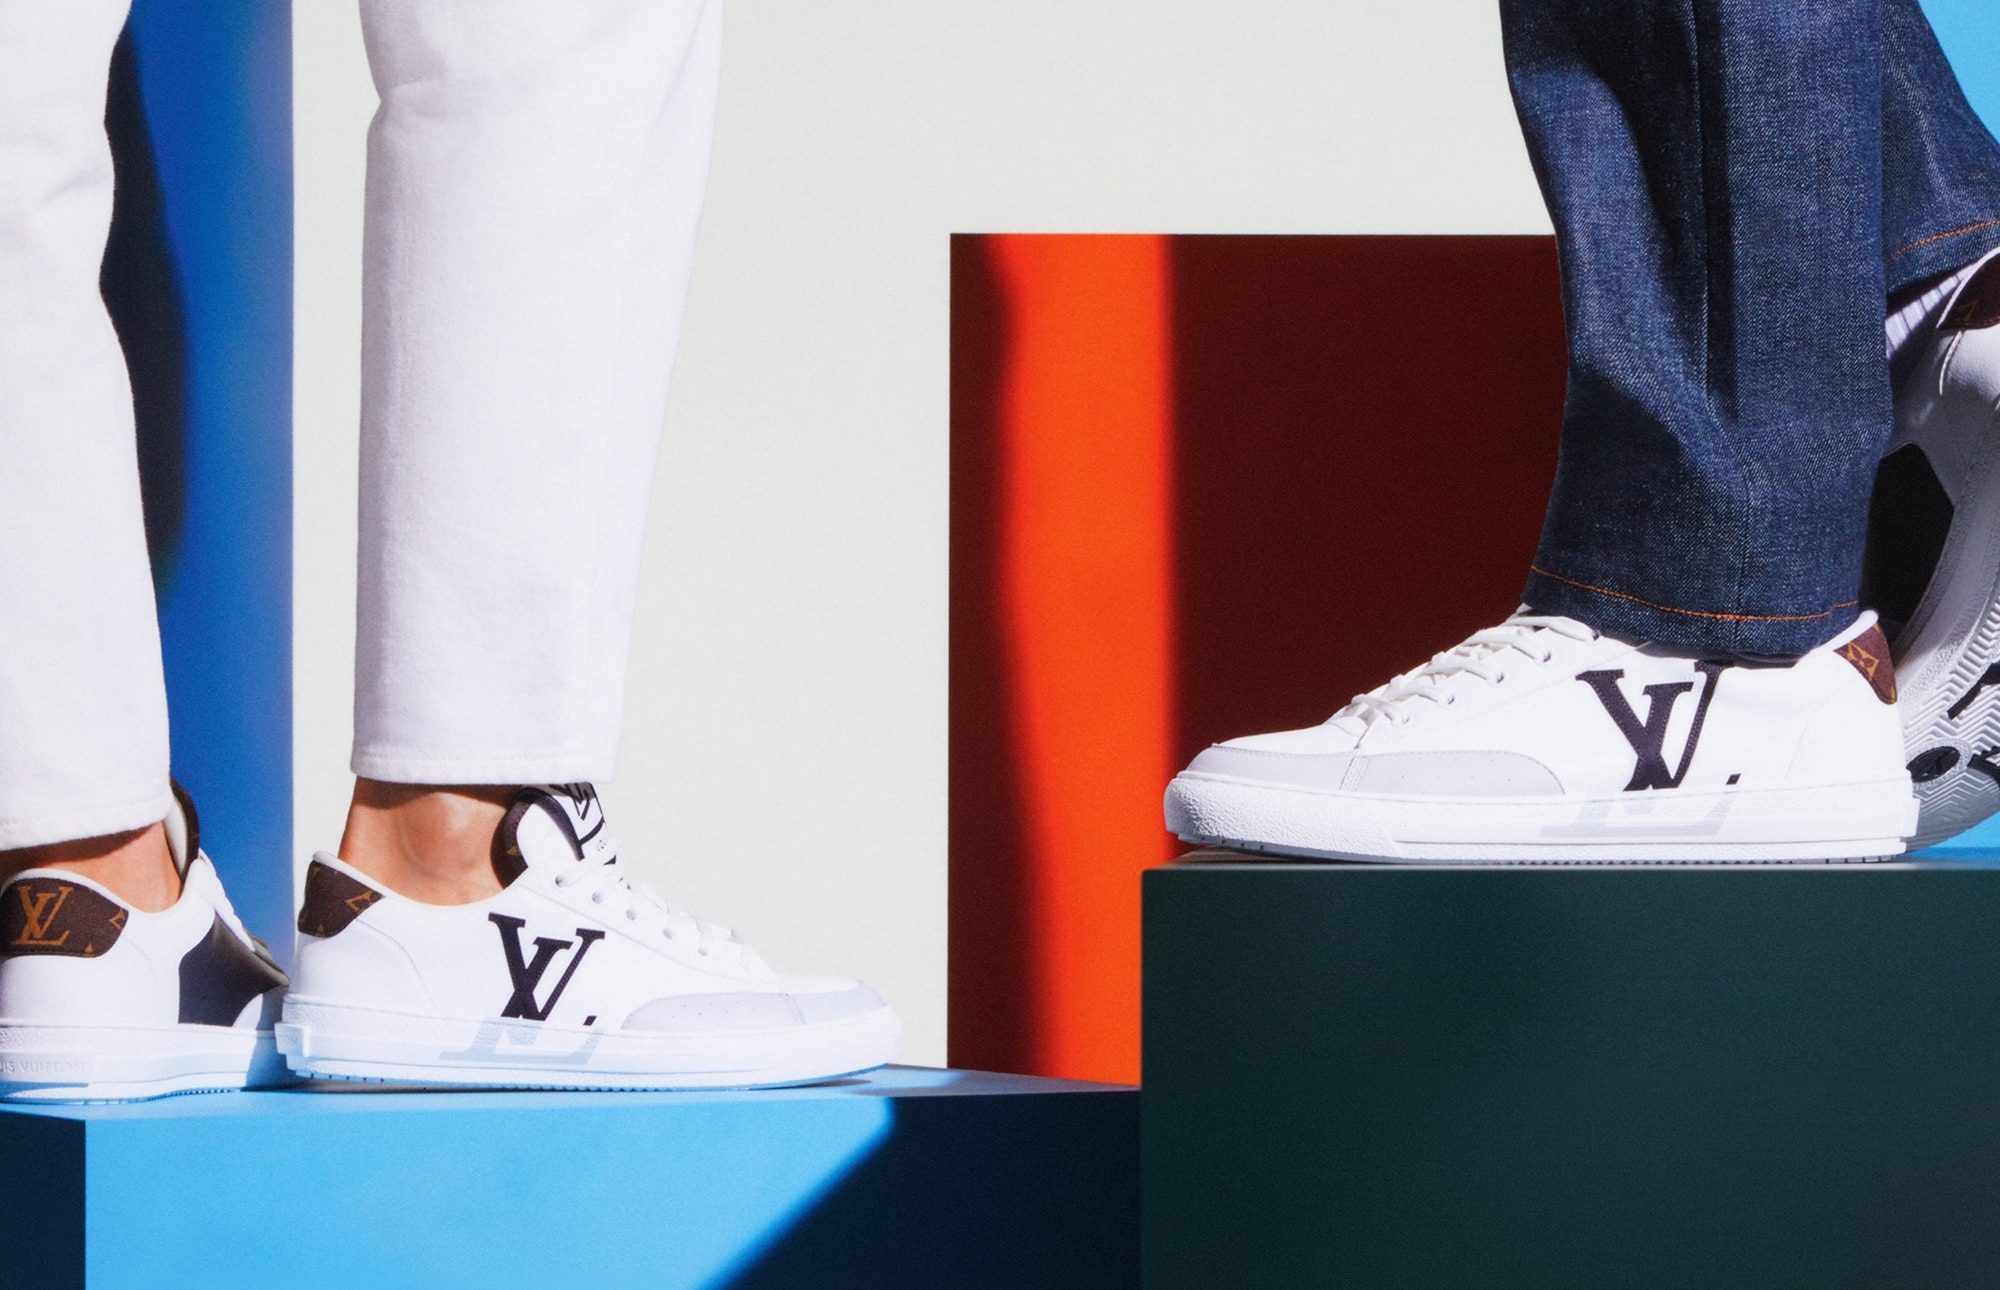 Louis Vuitton bets on eco-design for its new pair of sneakers